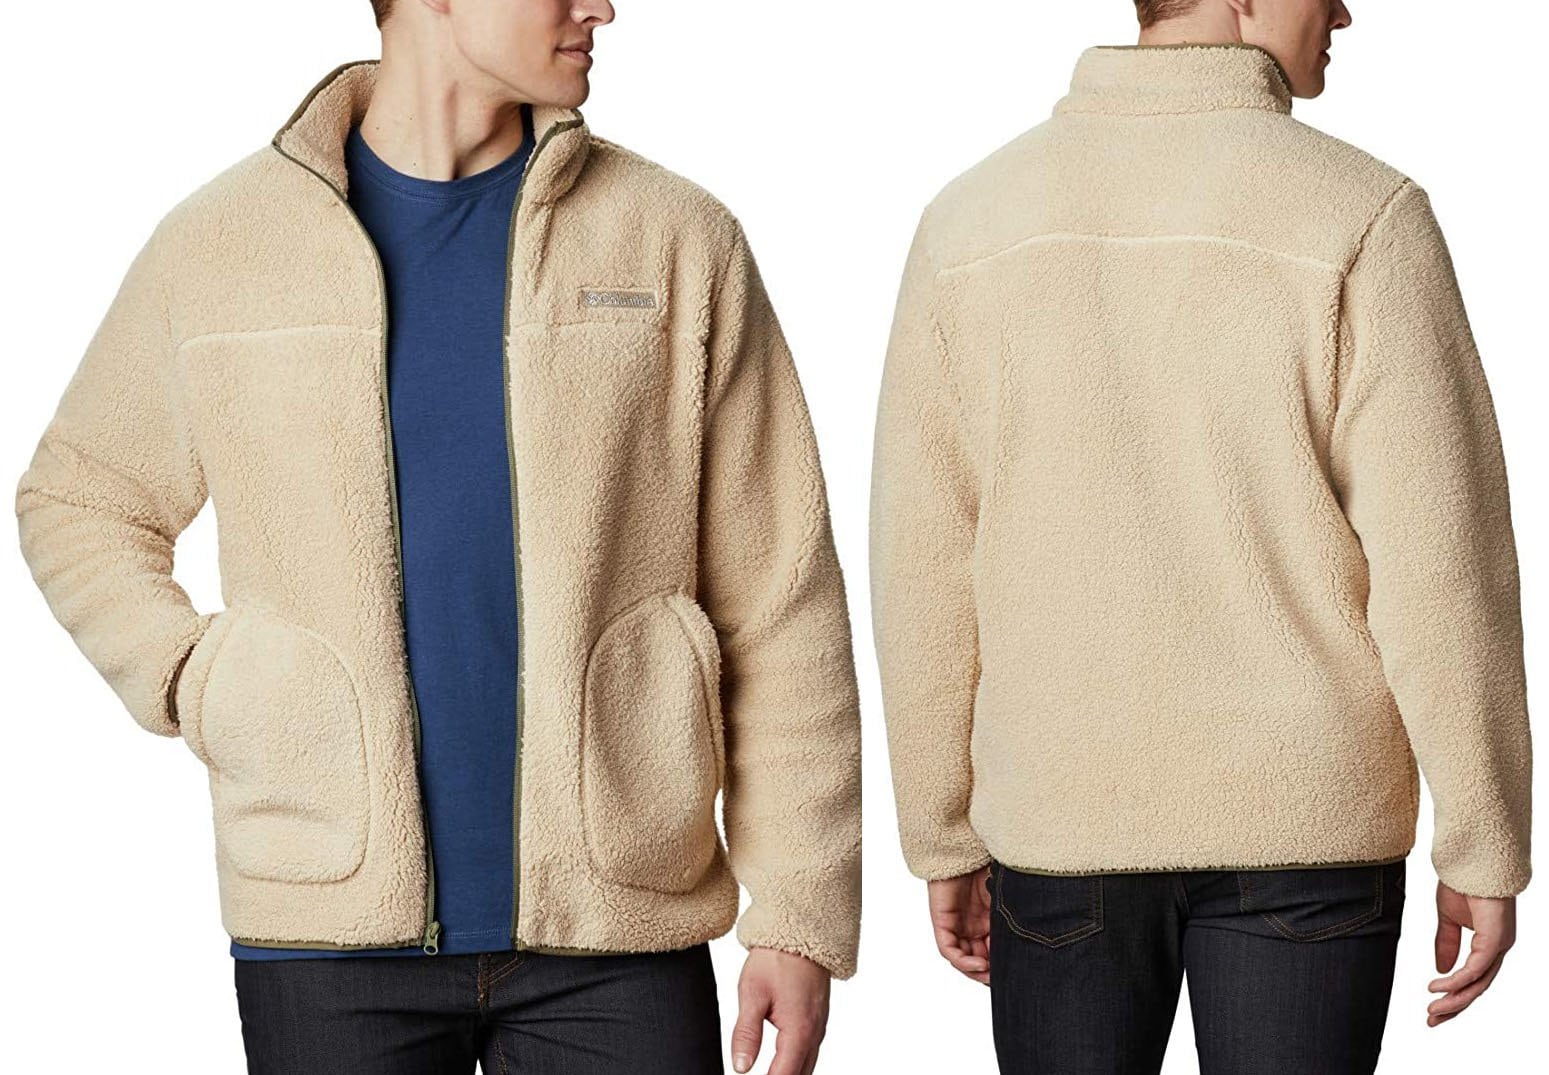 Columbia's Rugged Ridge II features lightweight Sherpa fleece, making it a perfect everyday go-to jacket